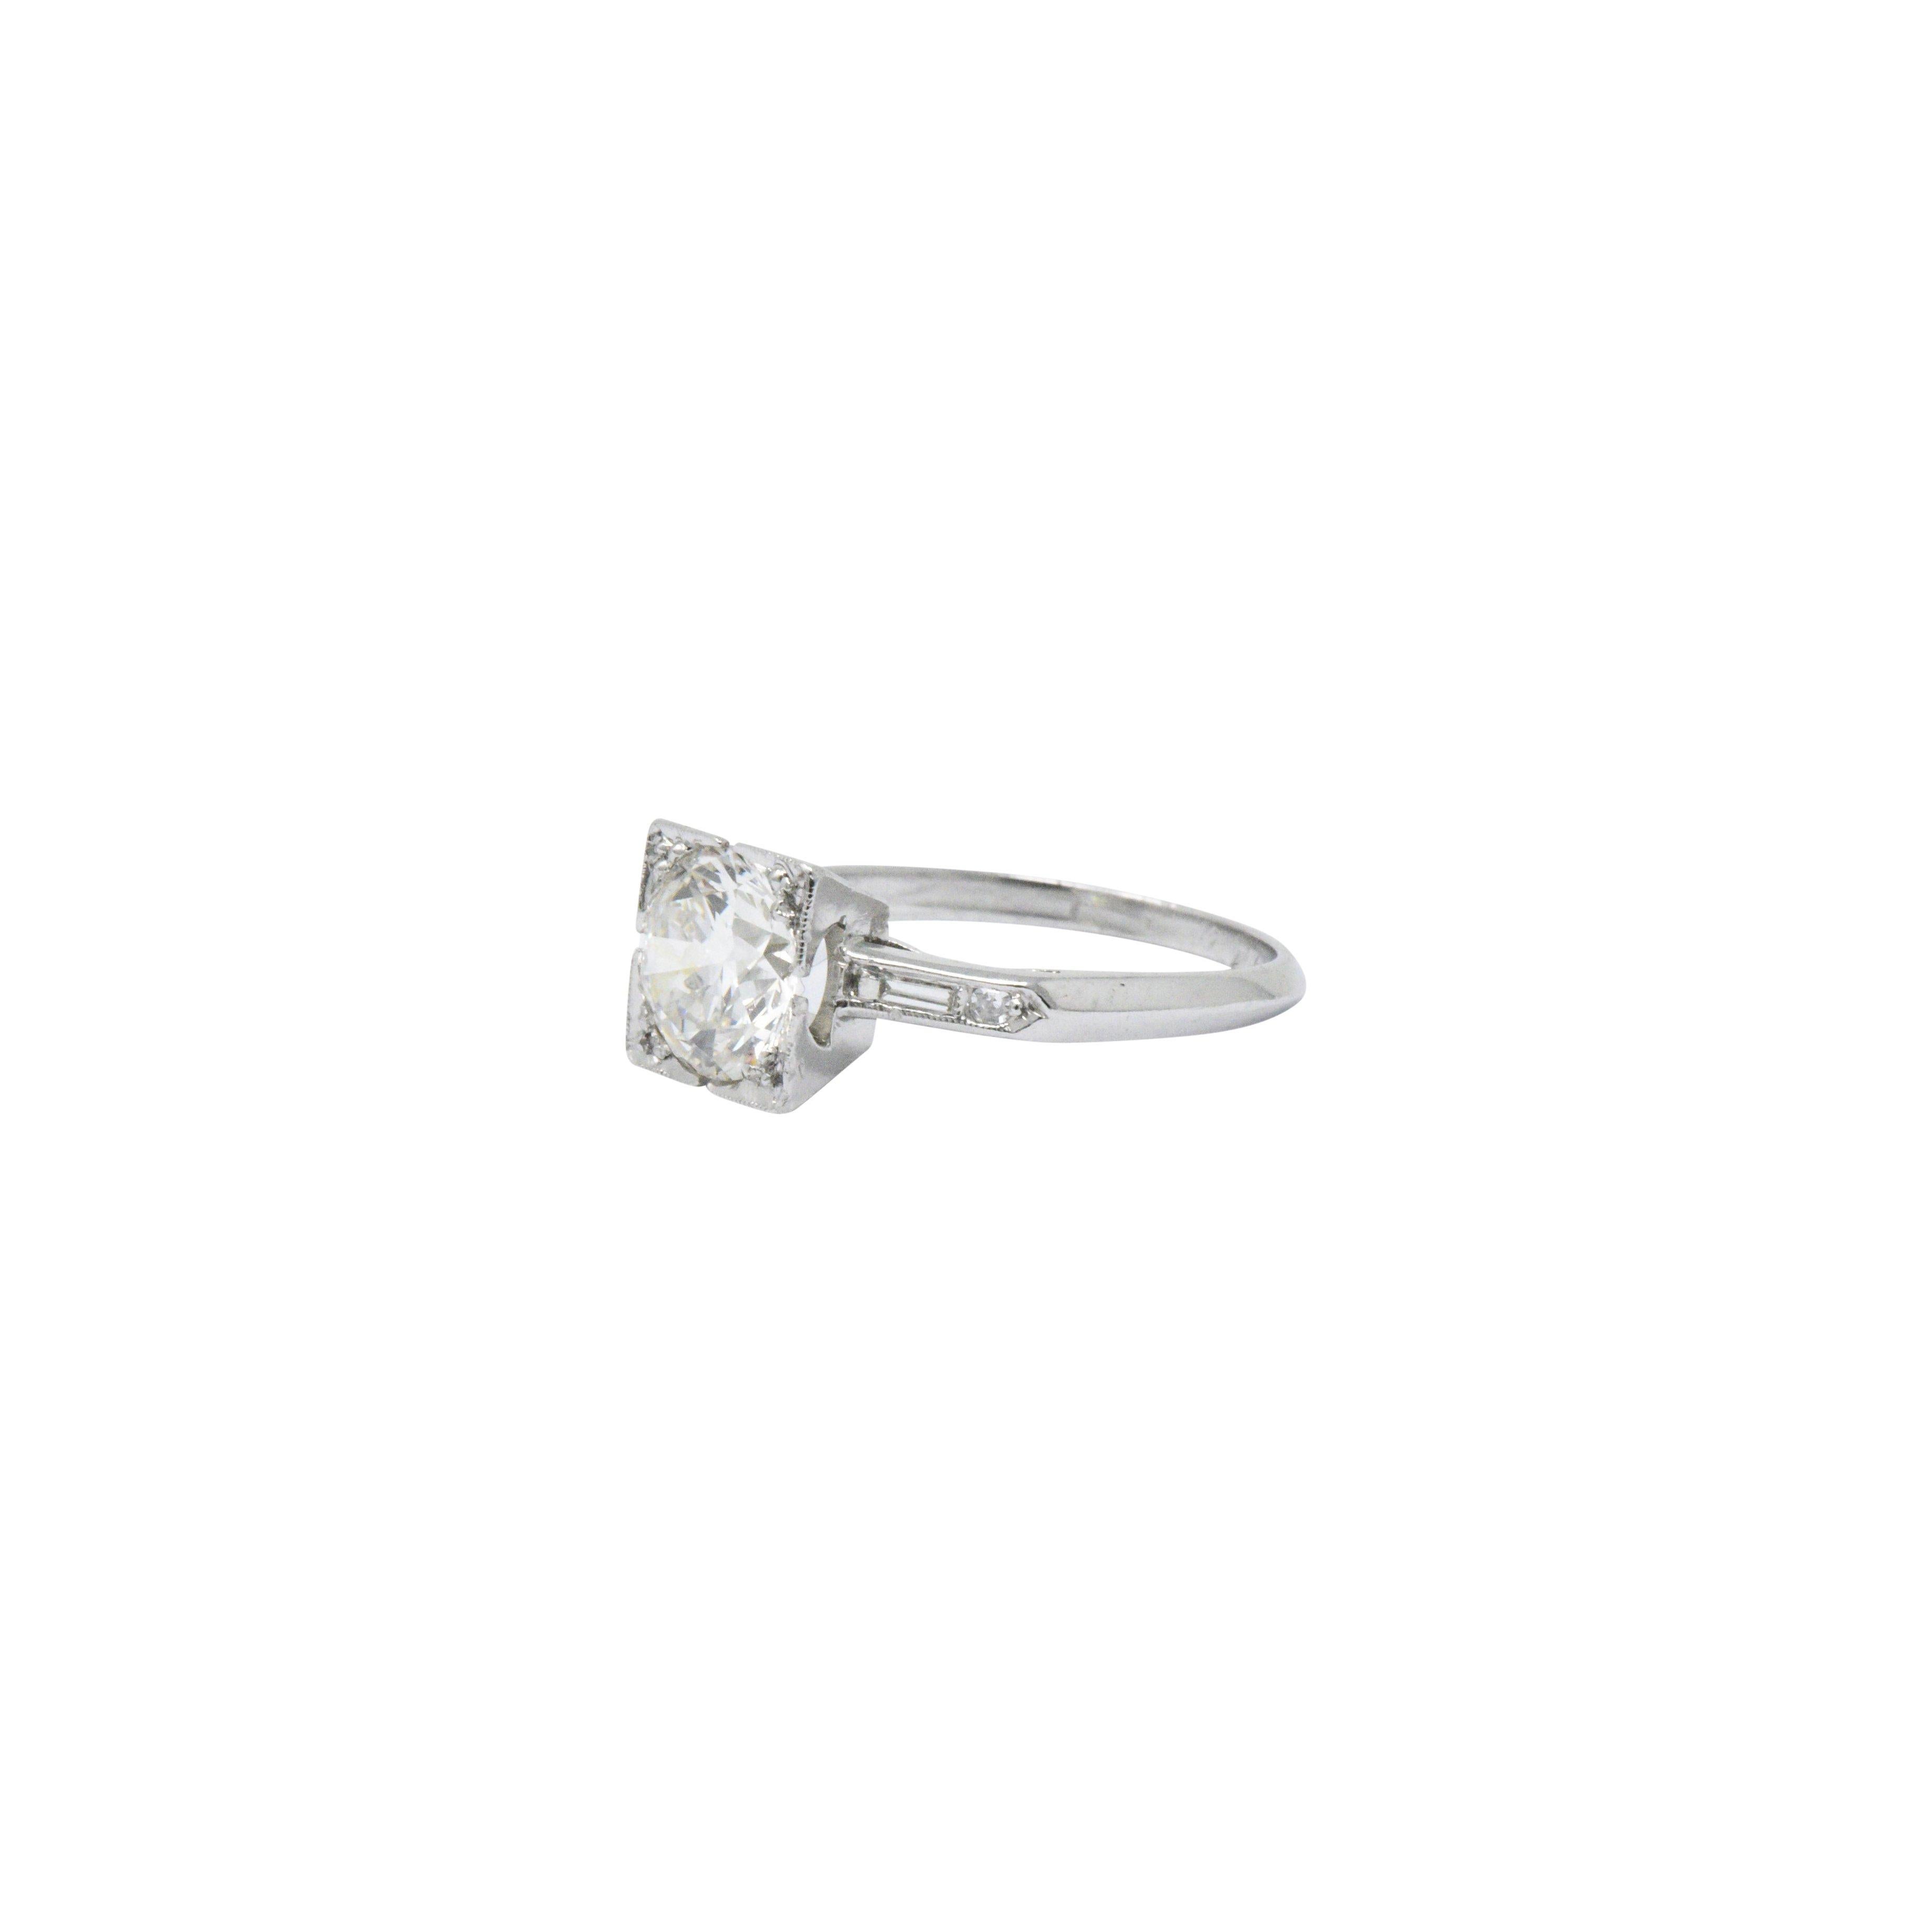 Centering a round brilliant cut diamond, set in a square form head, weighing 1.57 carats; I Color with VS1 clarity

Flanked by single cut and baguette cut diamond shoulders weighing approximately 0.18 carat; eye-clean and white

 Completed by knife